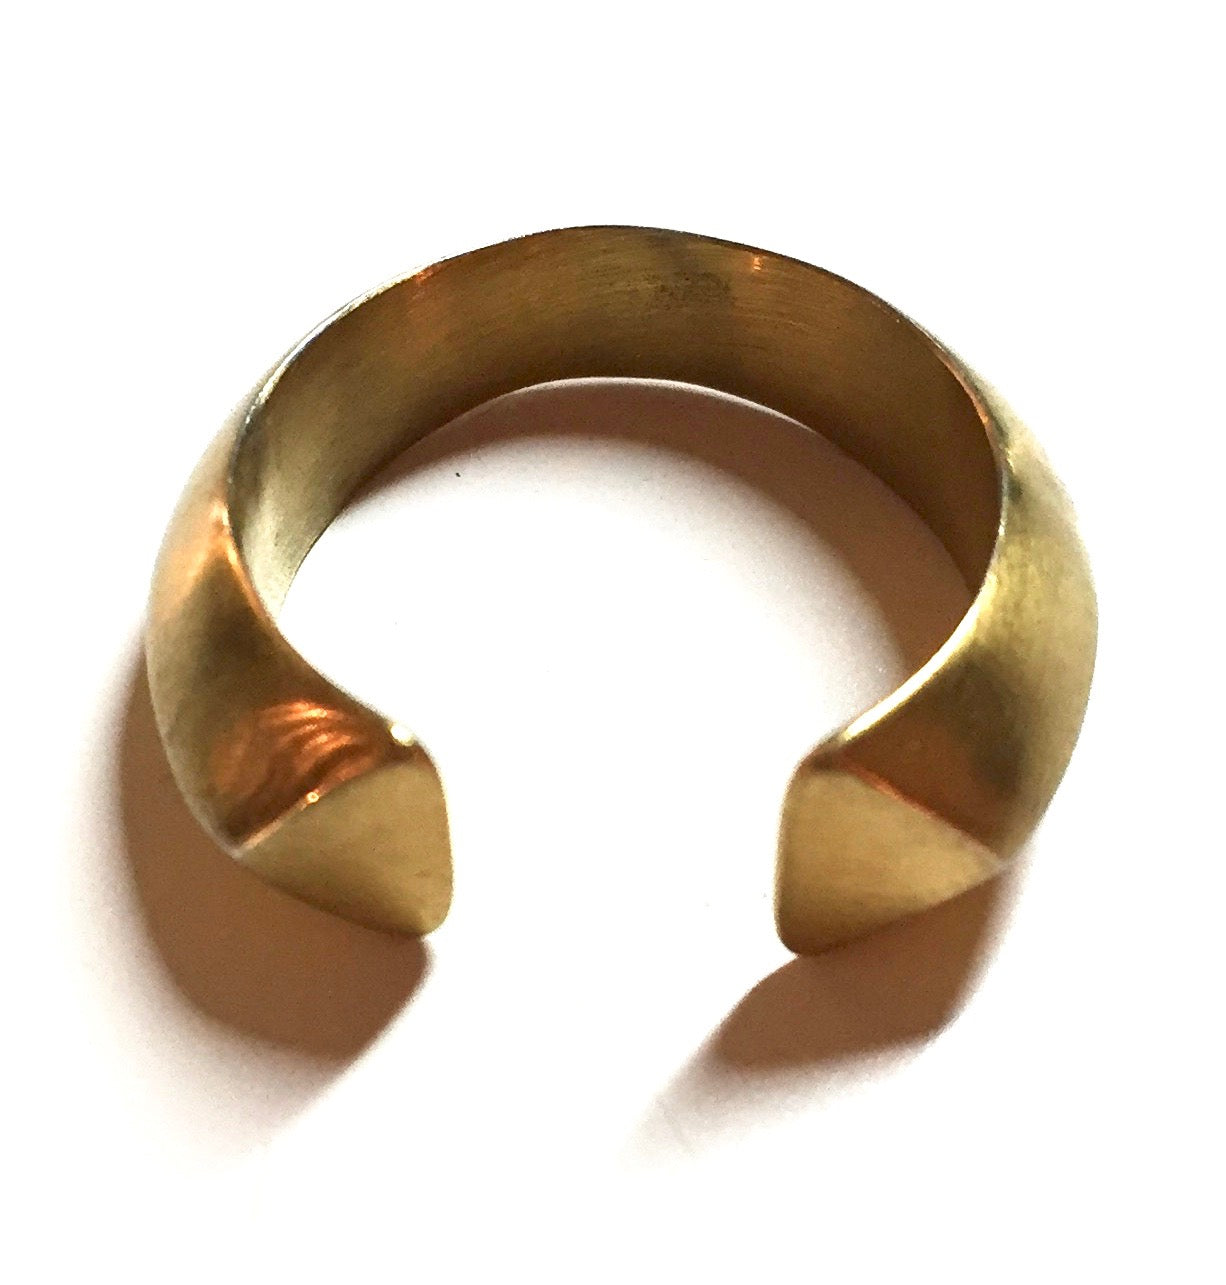 ARTAX FARRIER RING GOLD  | Equestrian Style Ring | Stainless Steel Jewelry - AtelierCG™